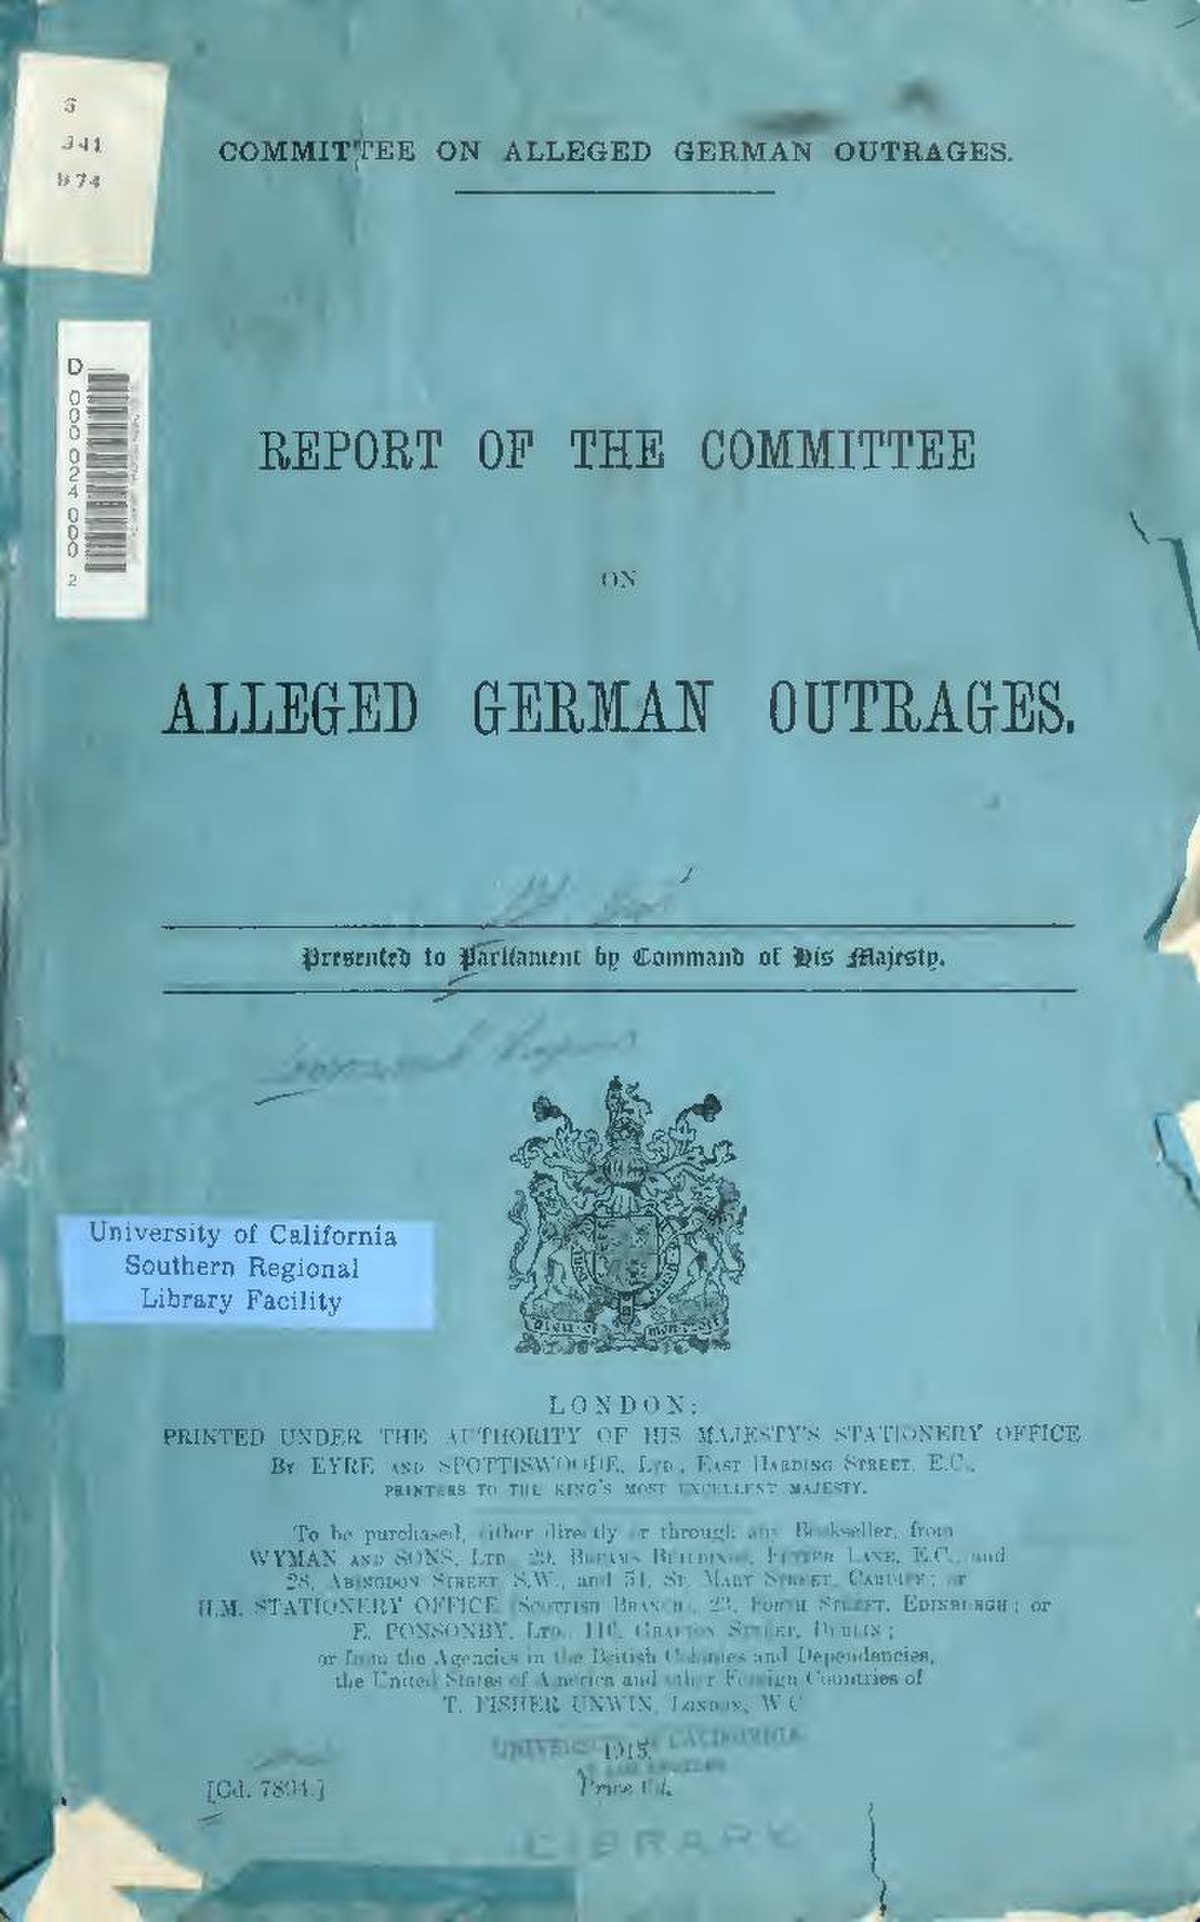 https://upload.wikimedia.org/wikipedia/commons/thumb/8/86/Report_of_the_Committee_on_Alleged_German_Outrages_%28and_Appendix%29_%28IA_allegedgermanout00grea%29.pdf/page1-1200px-Report_of_the_Committee_on_Alleged_German_Outrages_%28and_Appendix%29_%28IA_allegedgermanout00grea%29.pdf.jpg